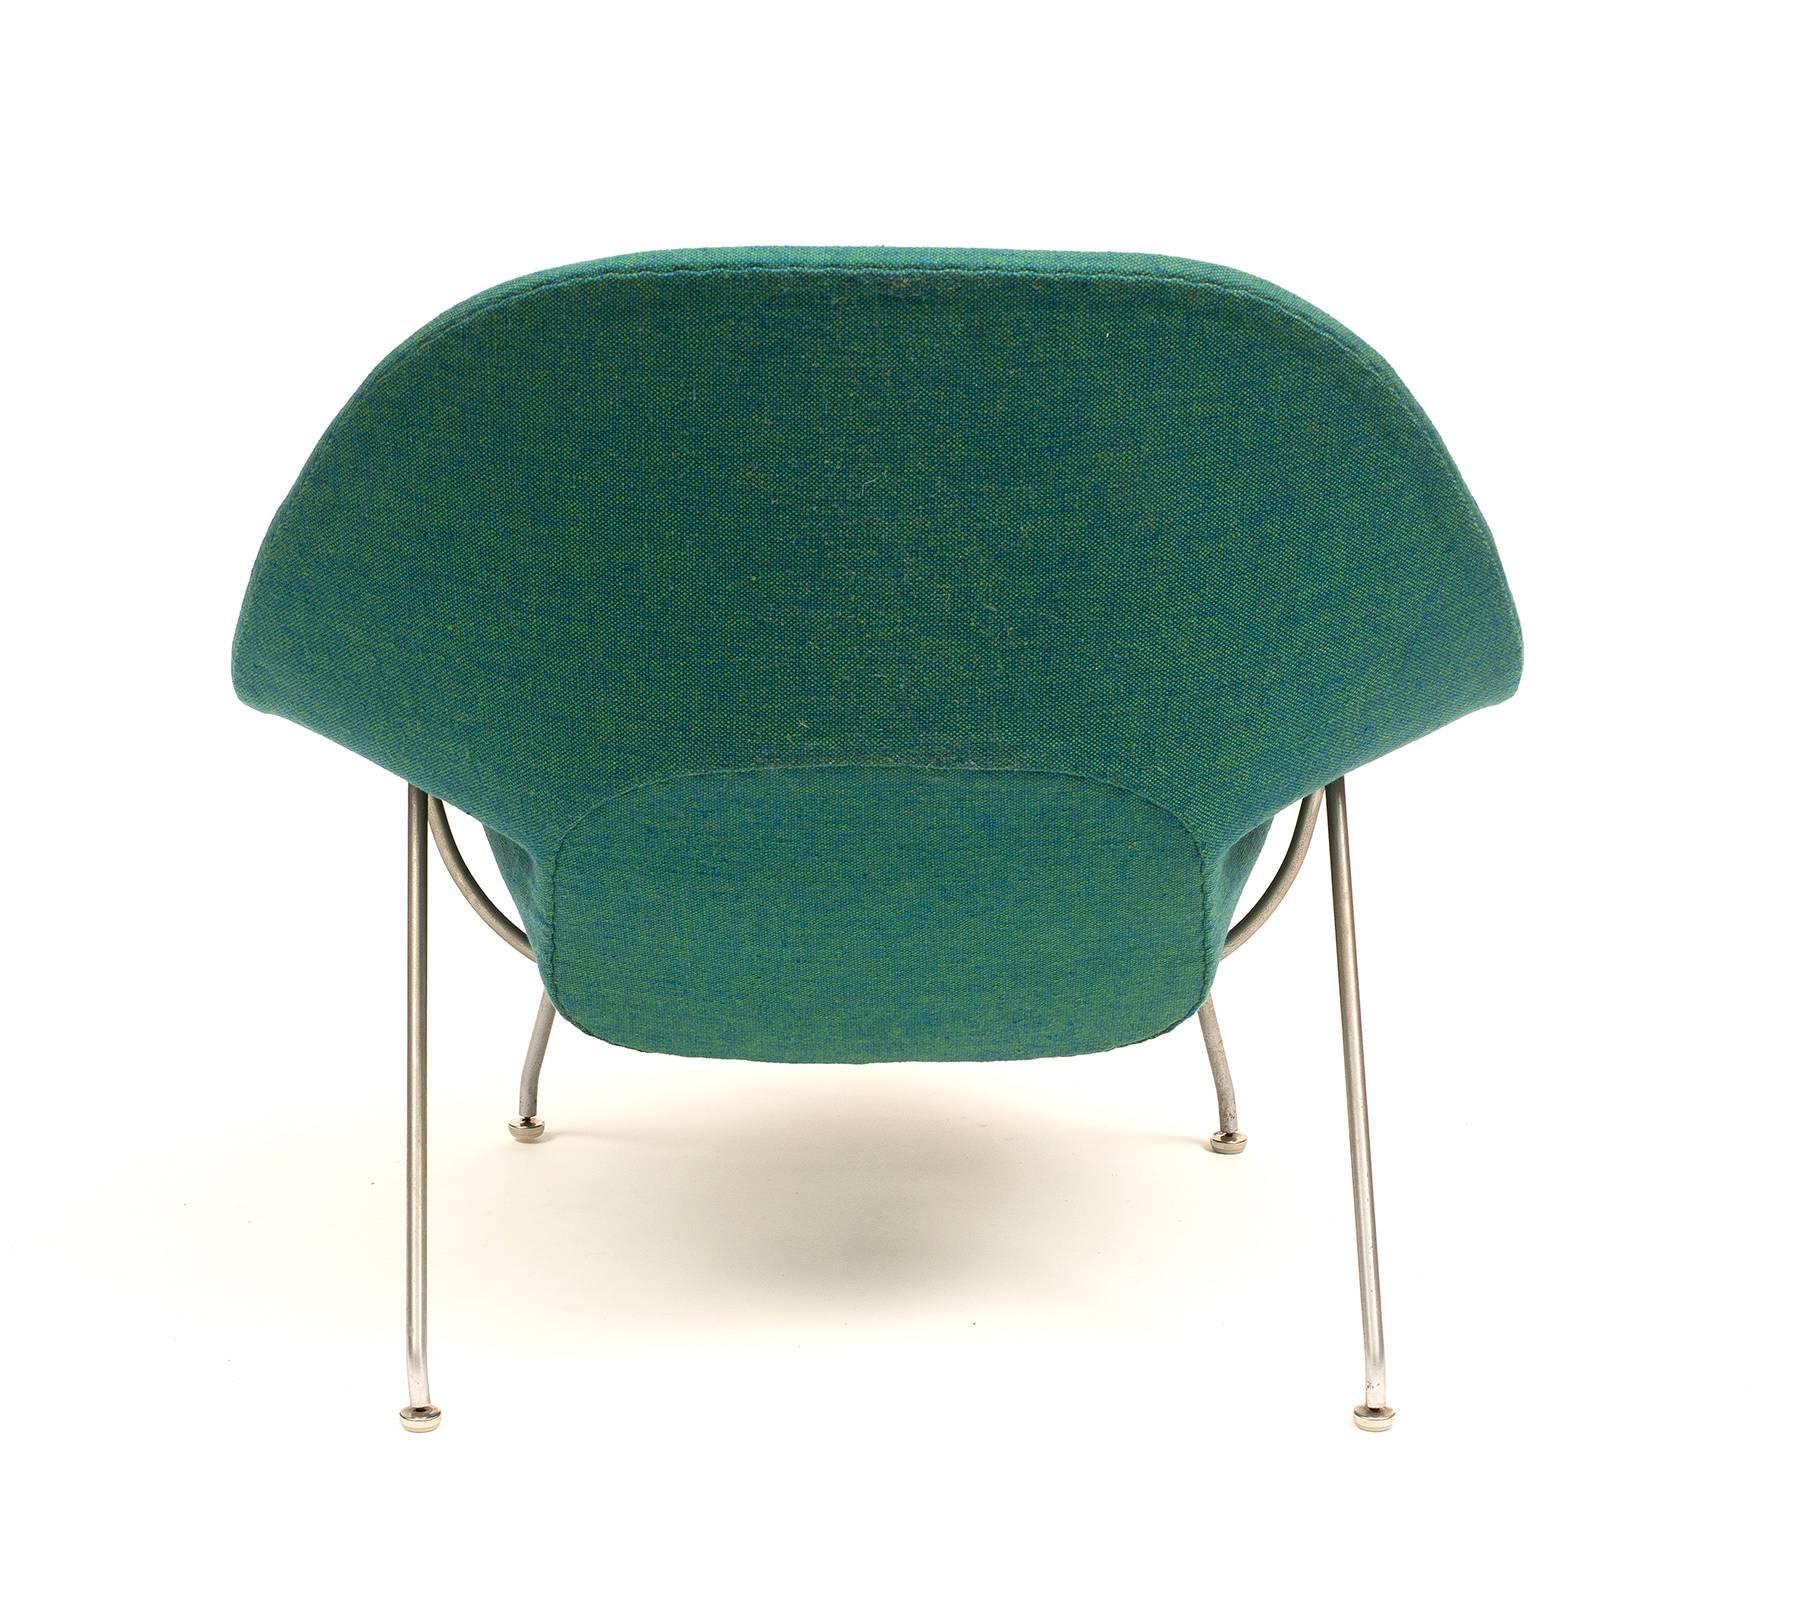 American Womb Chair by Eero Saarinen for Knoll in Original Knoll Fabric, 1970s